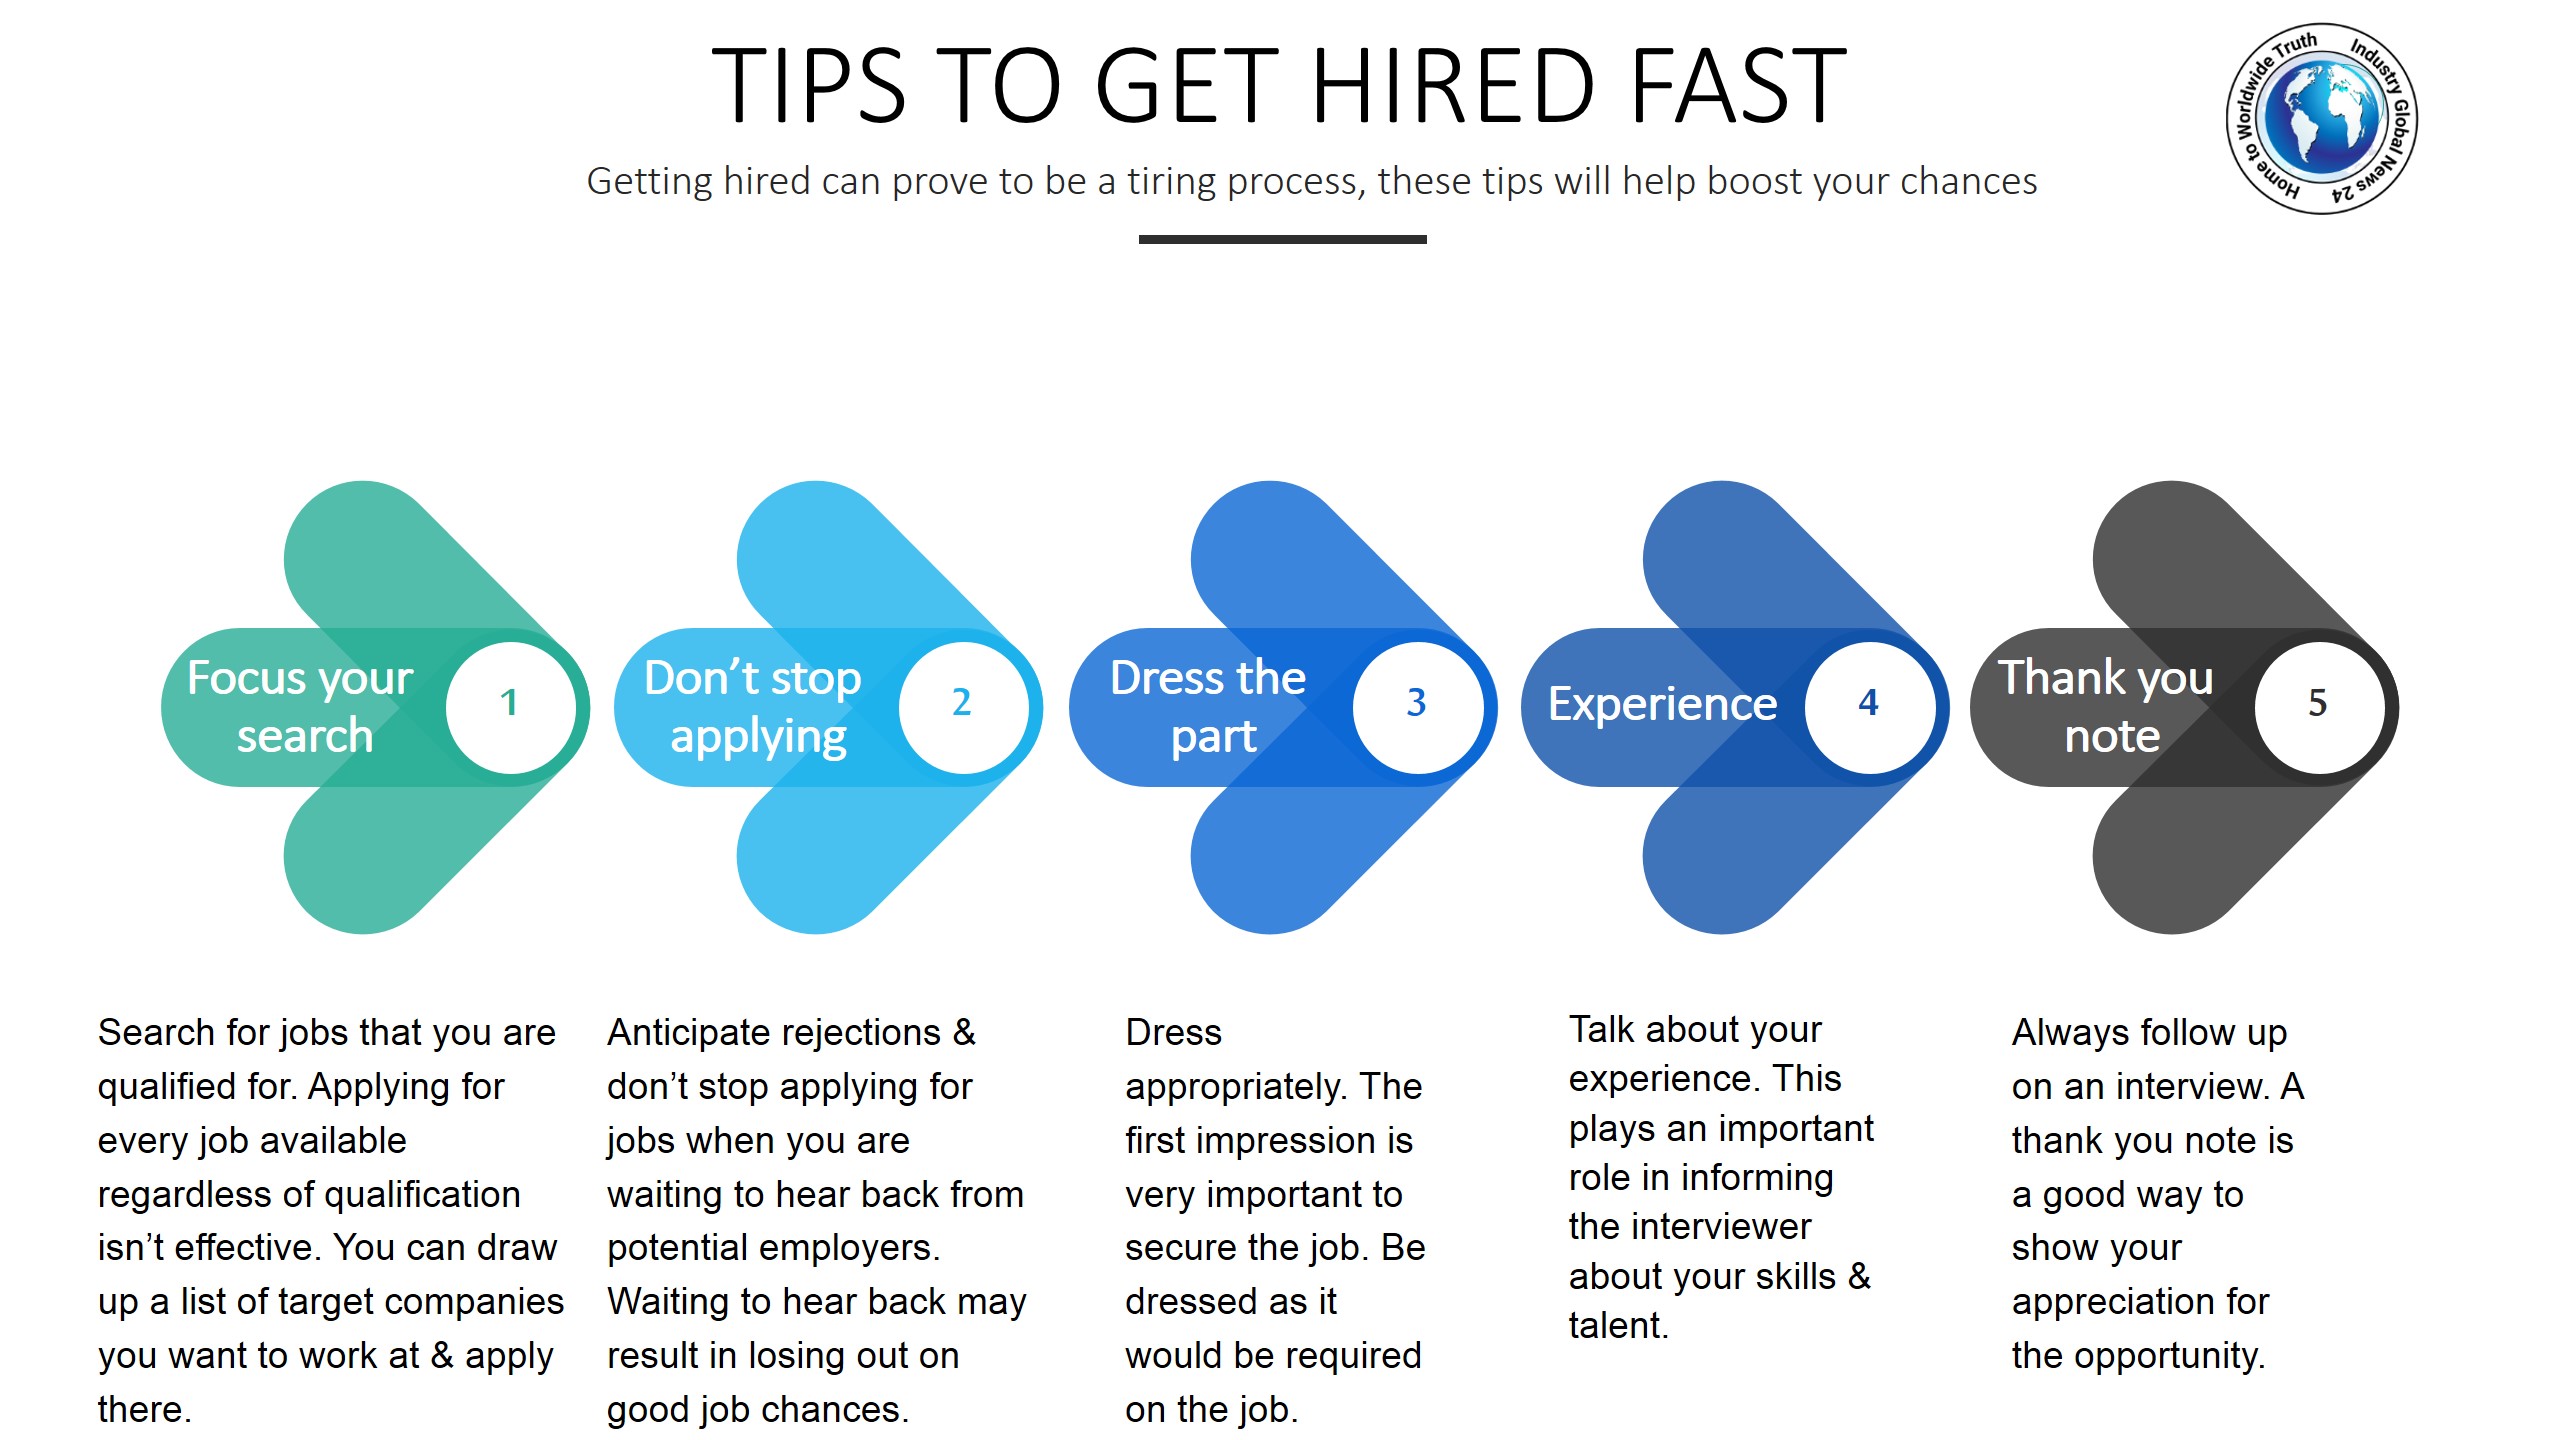 Tips to get hired fast